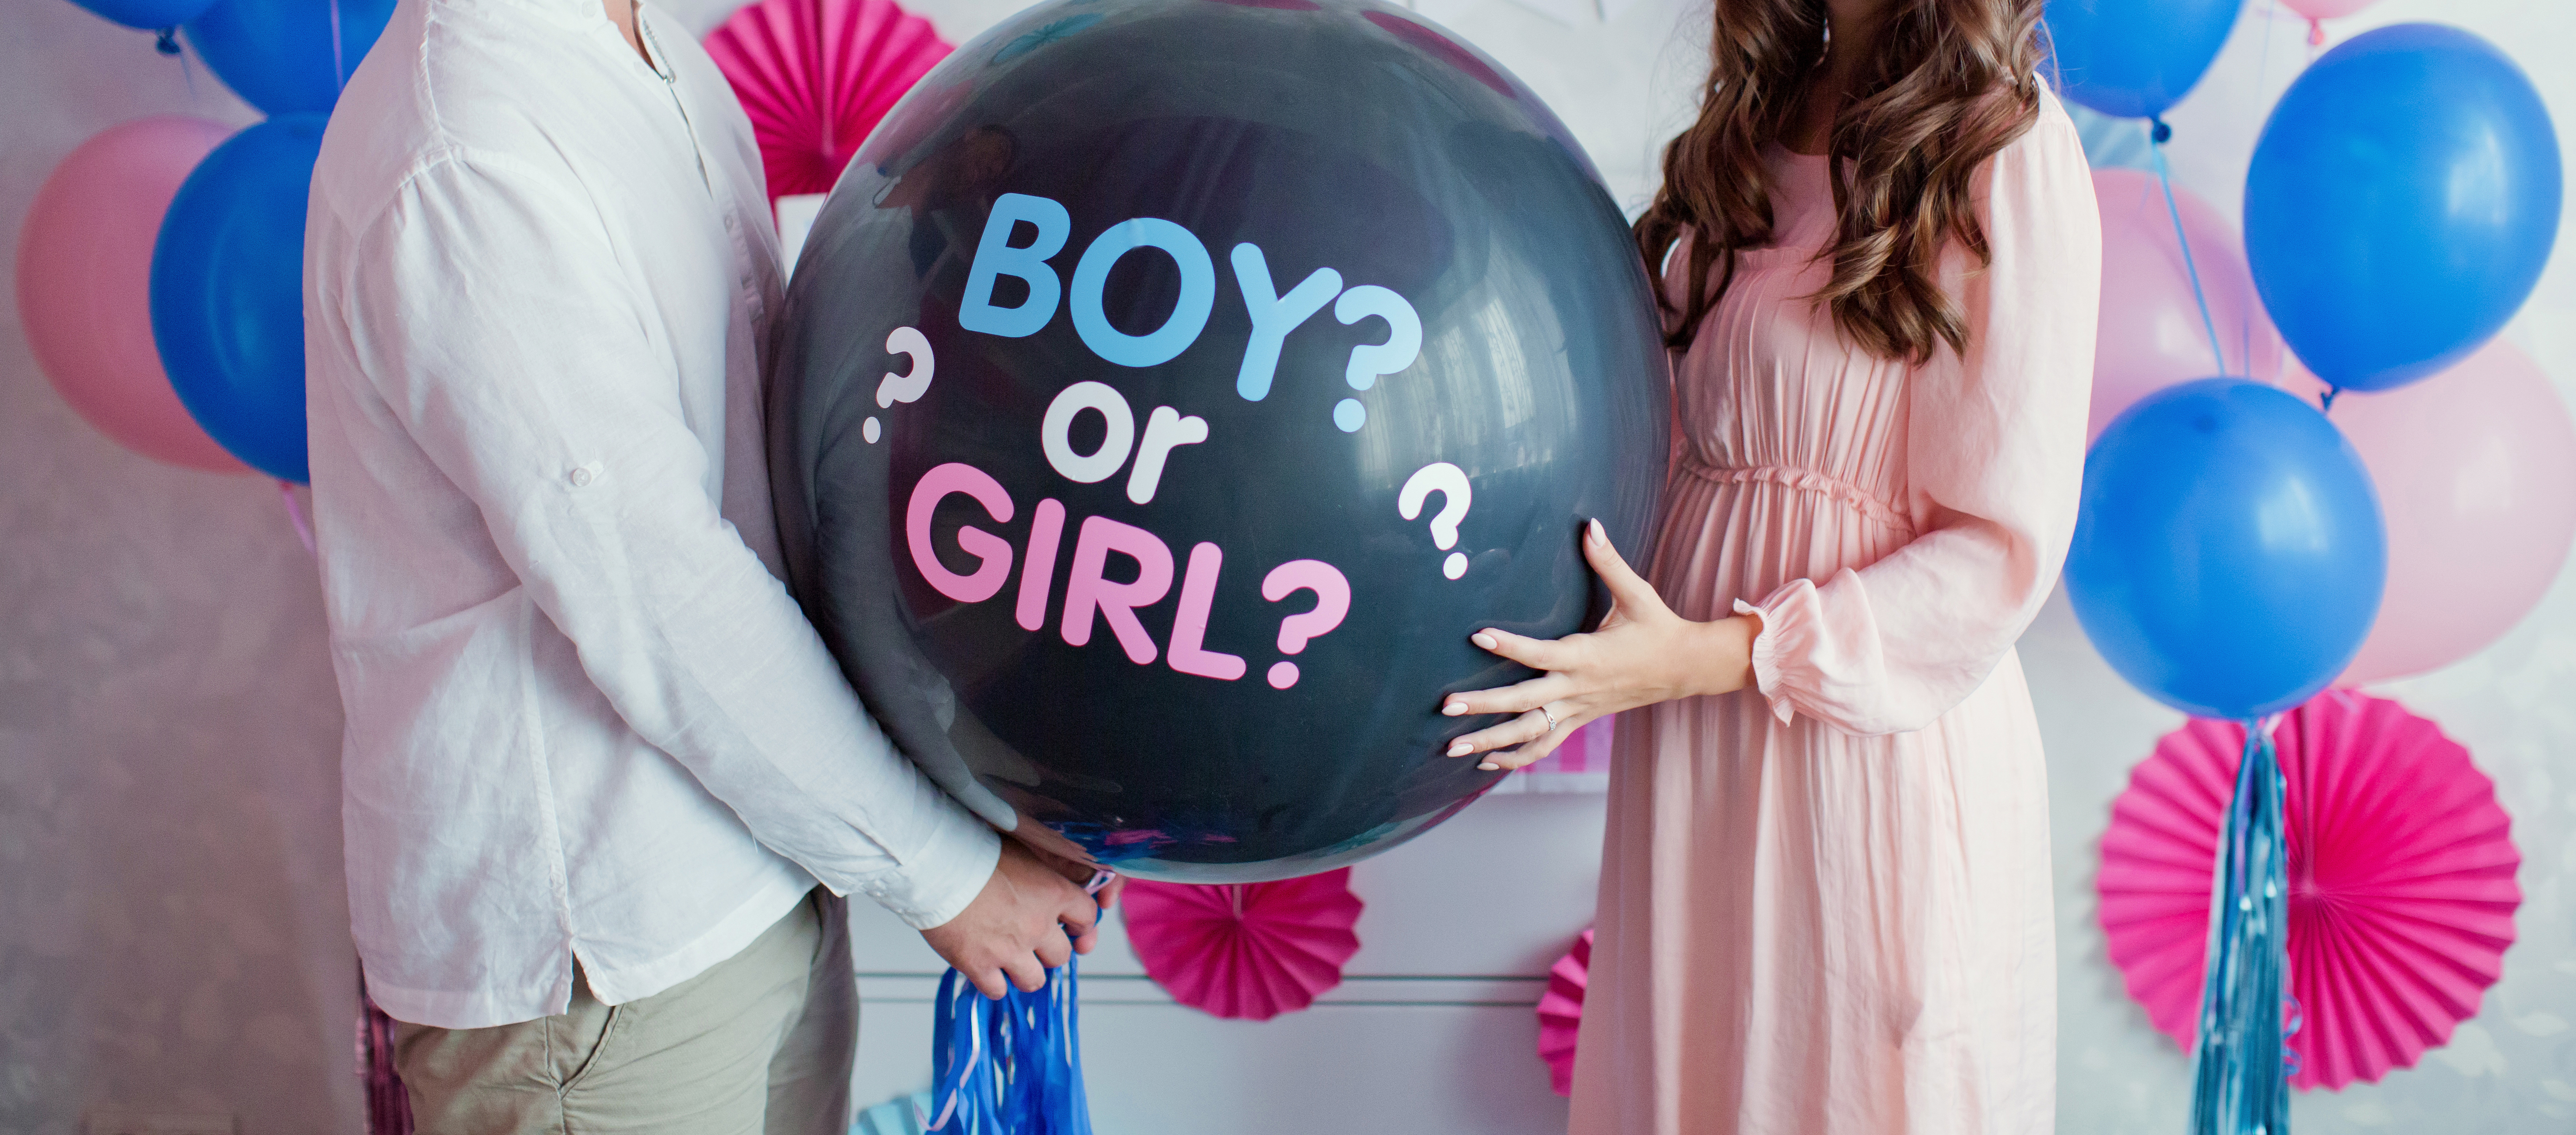 A couple holding a gender reveal balloon marked "boy or girl?" | Source: Shutterstock